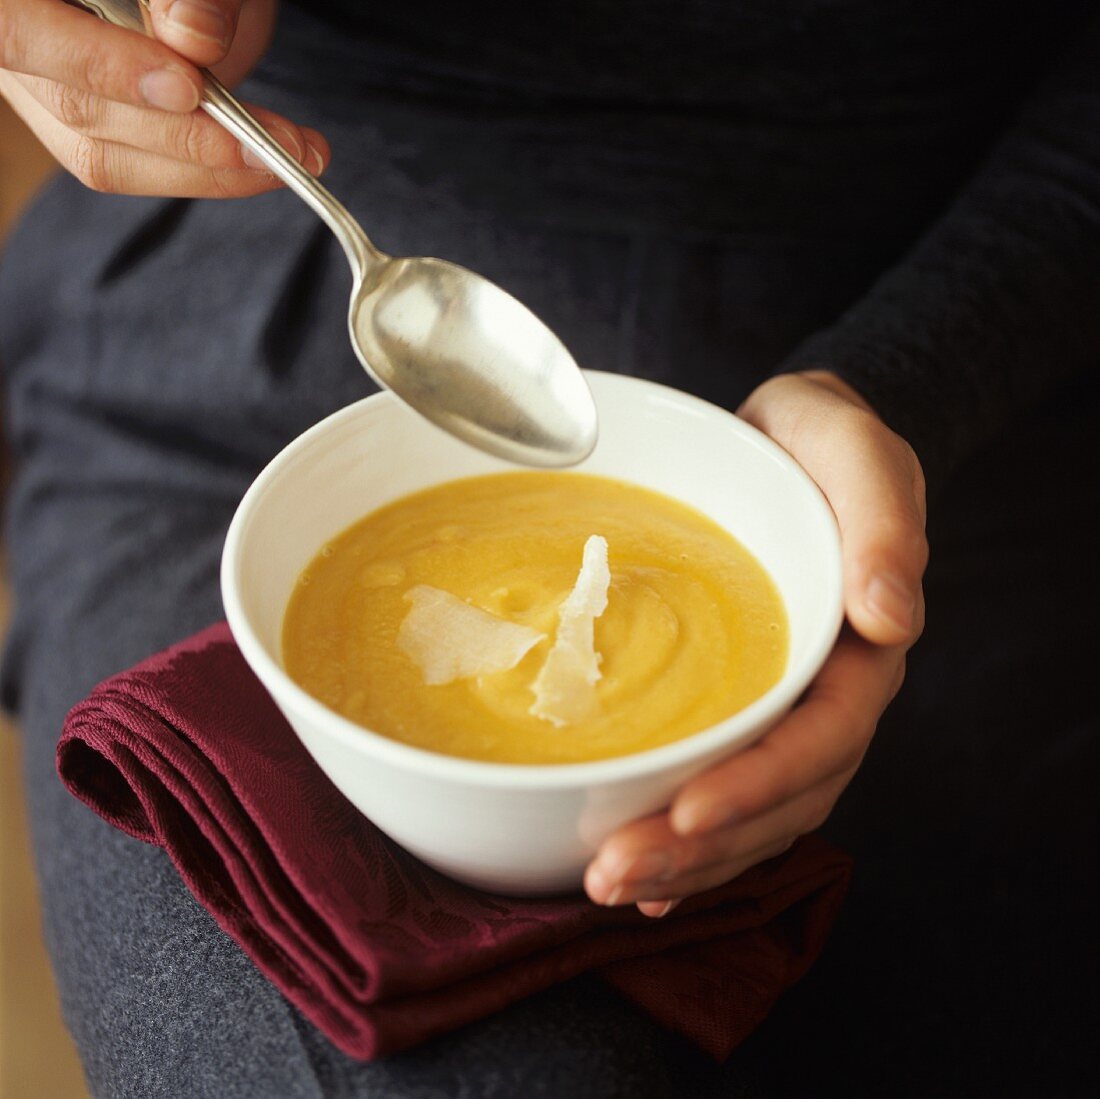 Person holding a bowl of pumpkin soup with Parmesan shavings